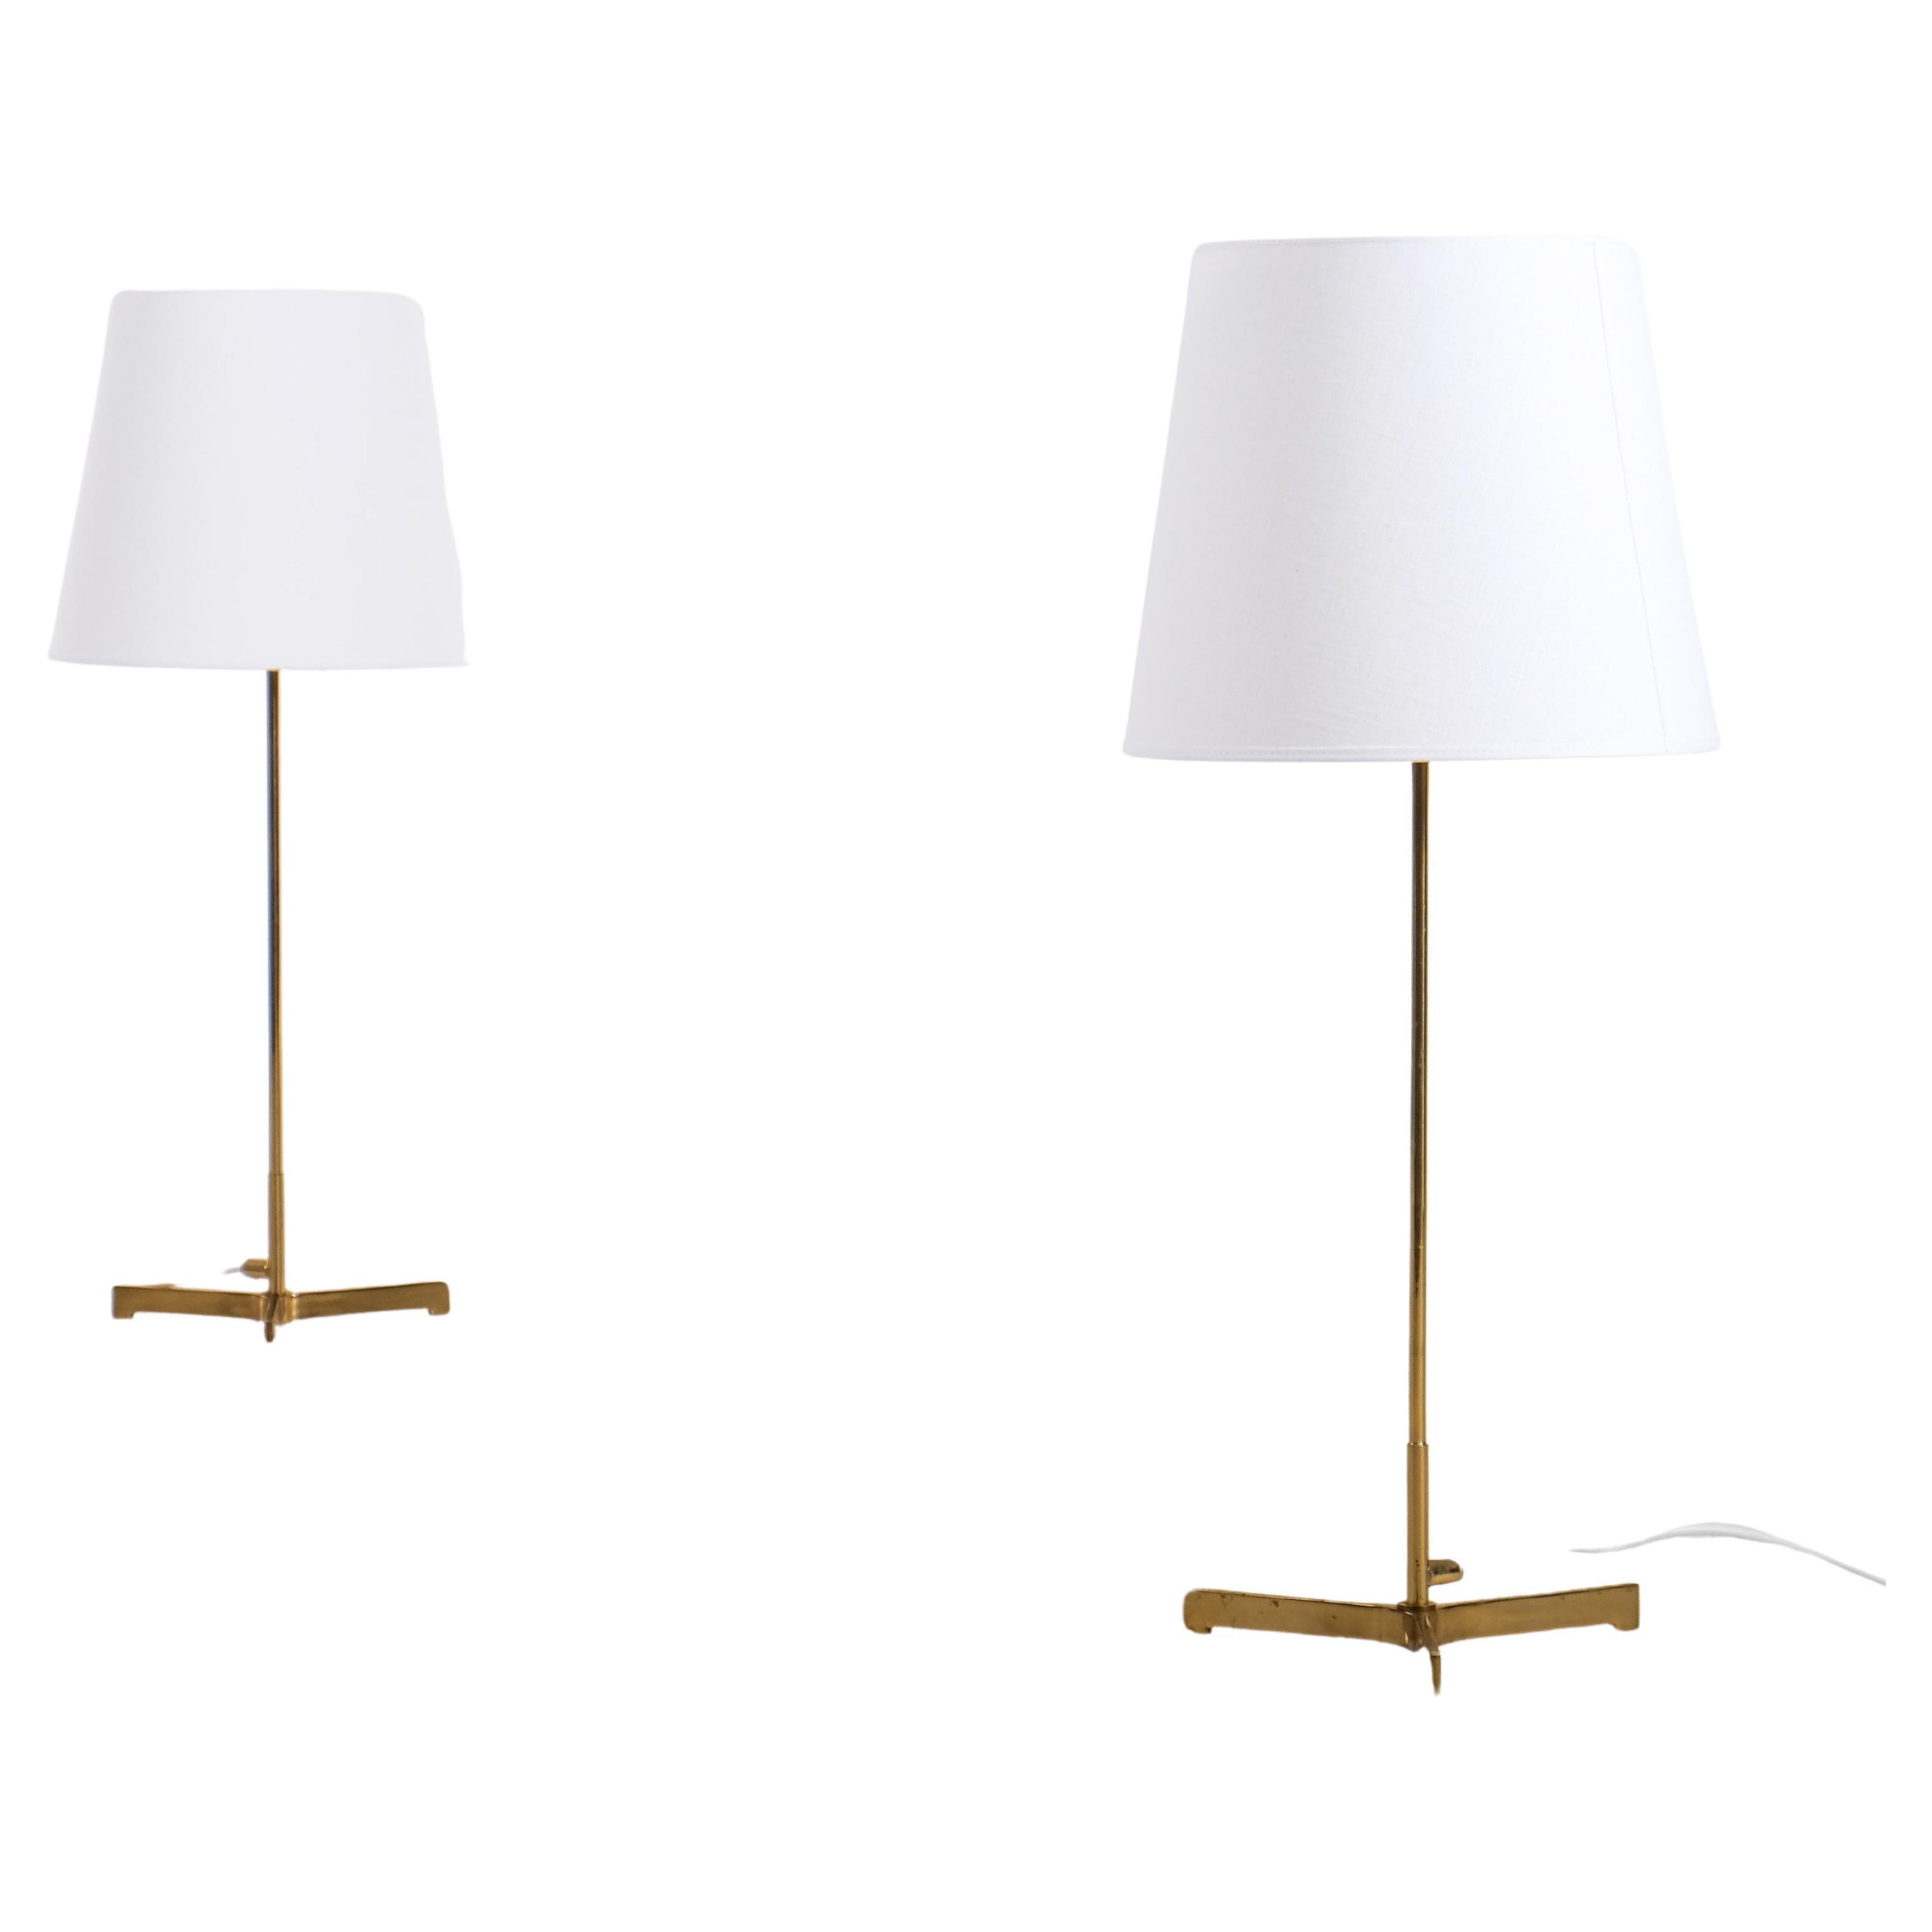 Pair of Hans-Agne Jakobsson Brass Table Lamps, 1960s For Sale